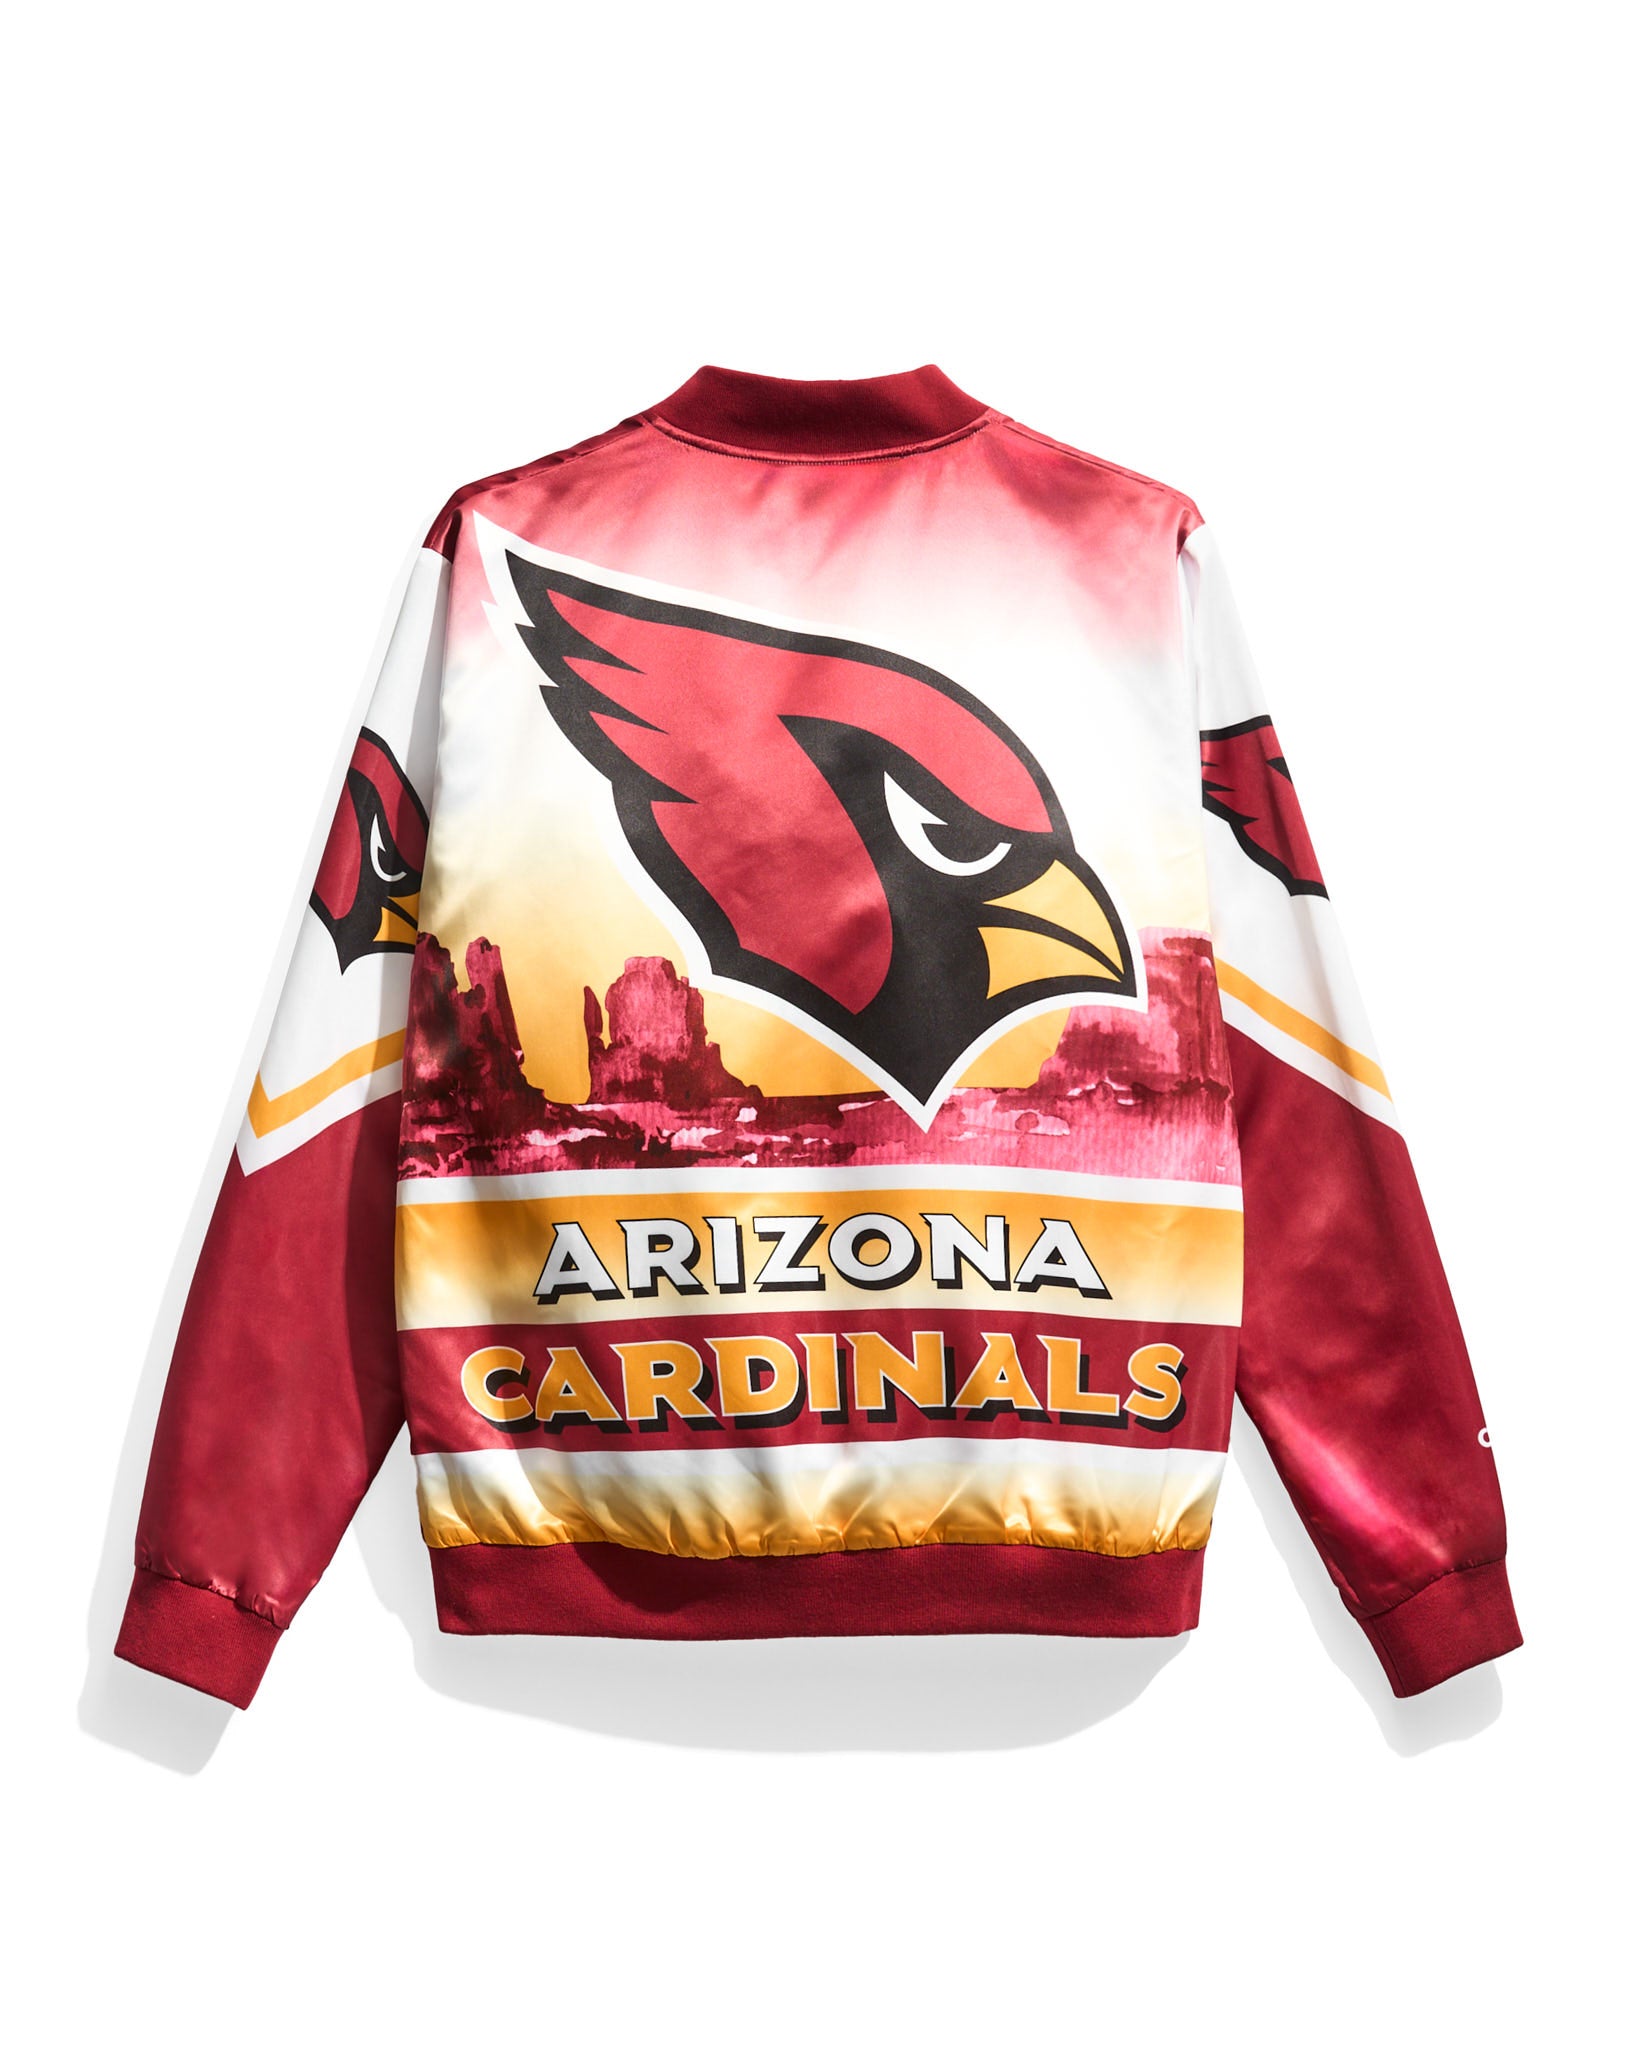 The Cardinal & Gold State Hooded Sweatshirt